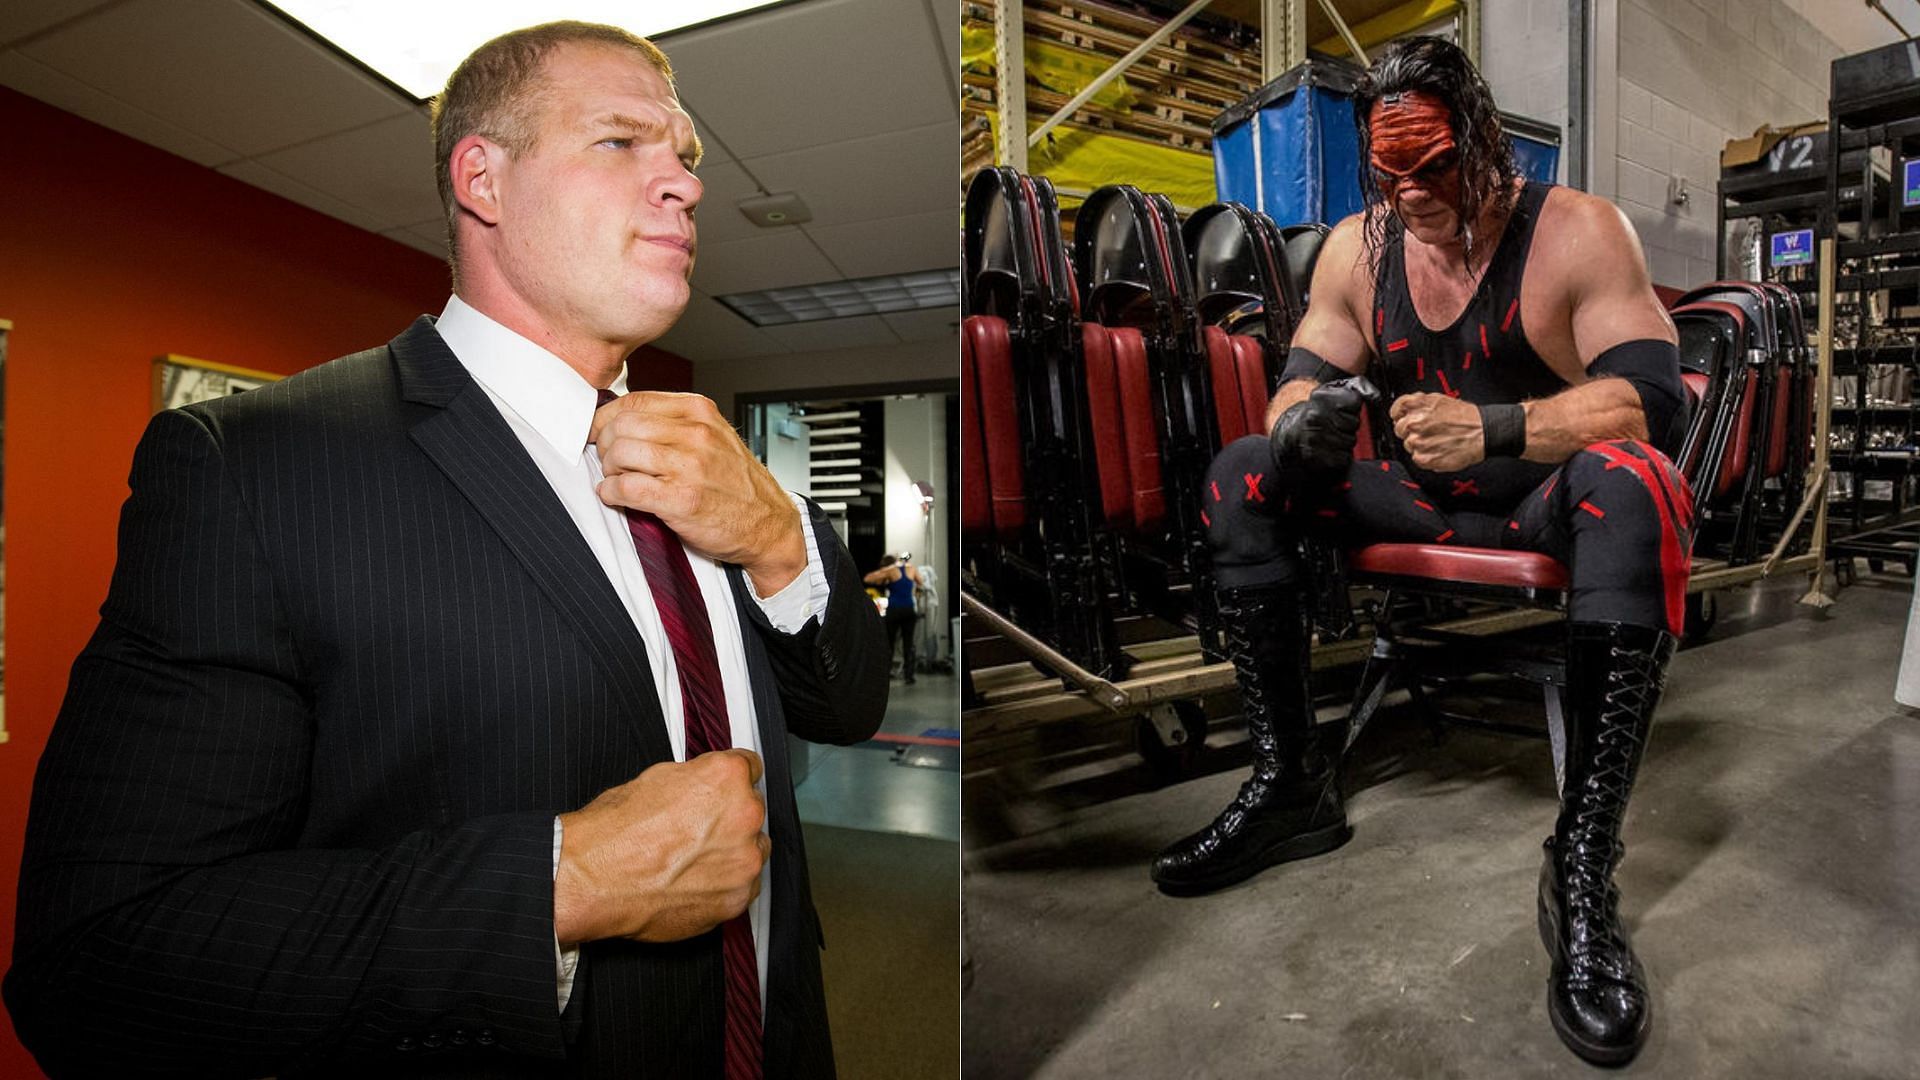 Kane was inducted into the WWE Hall of Fame in 2021